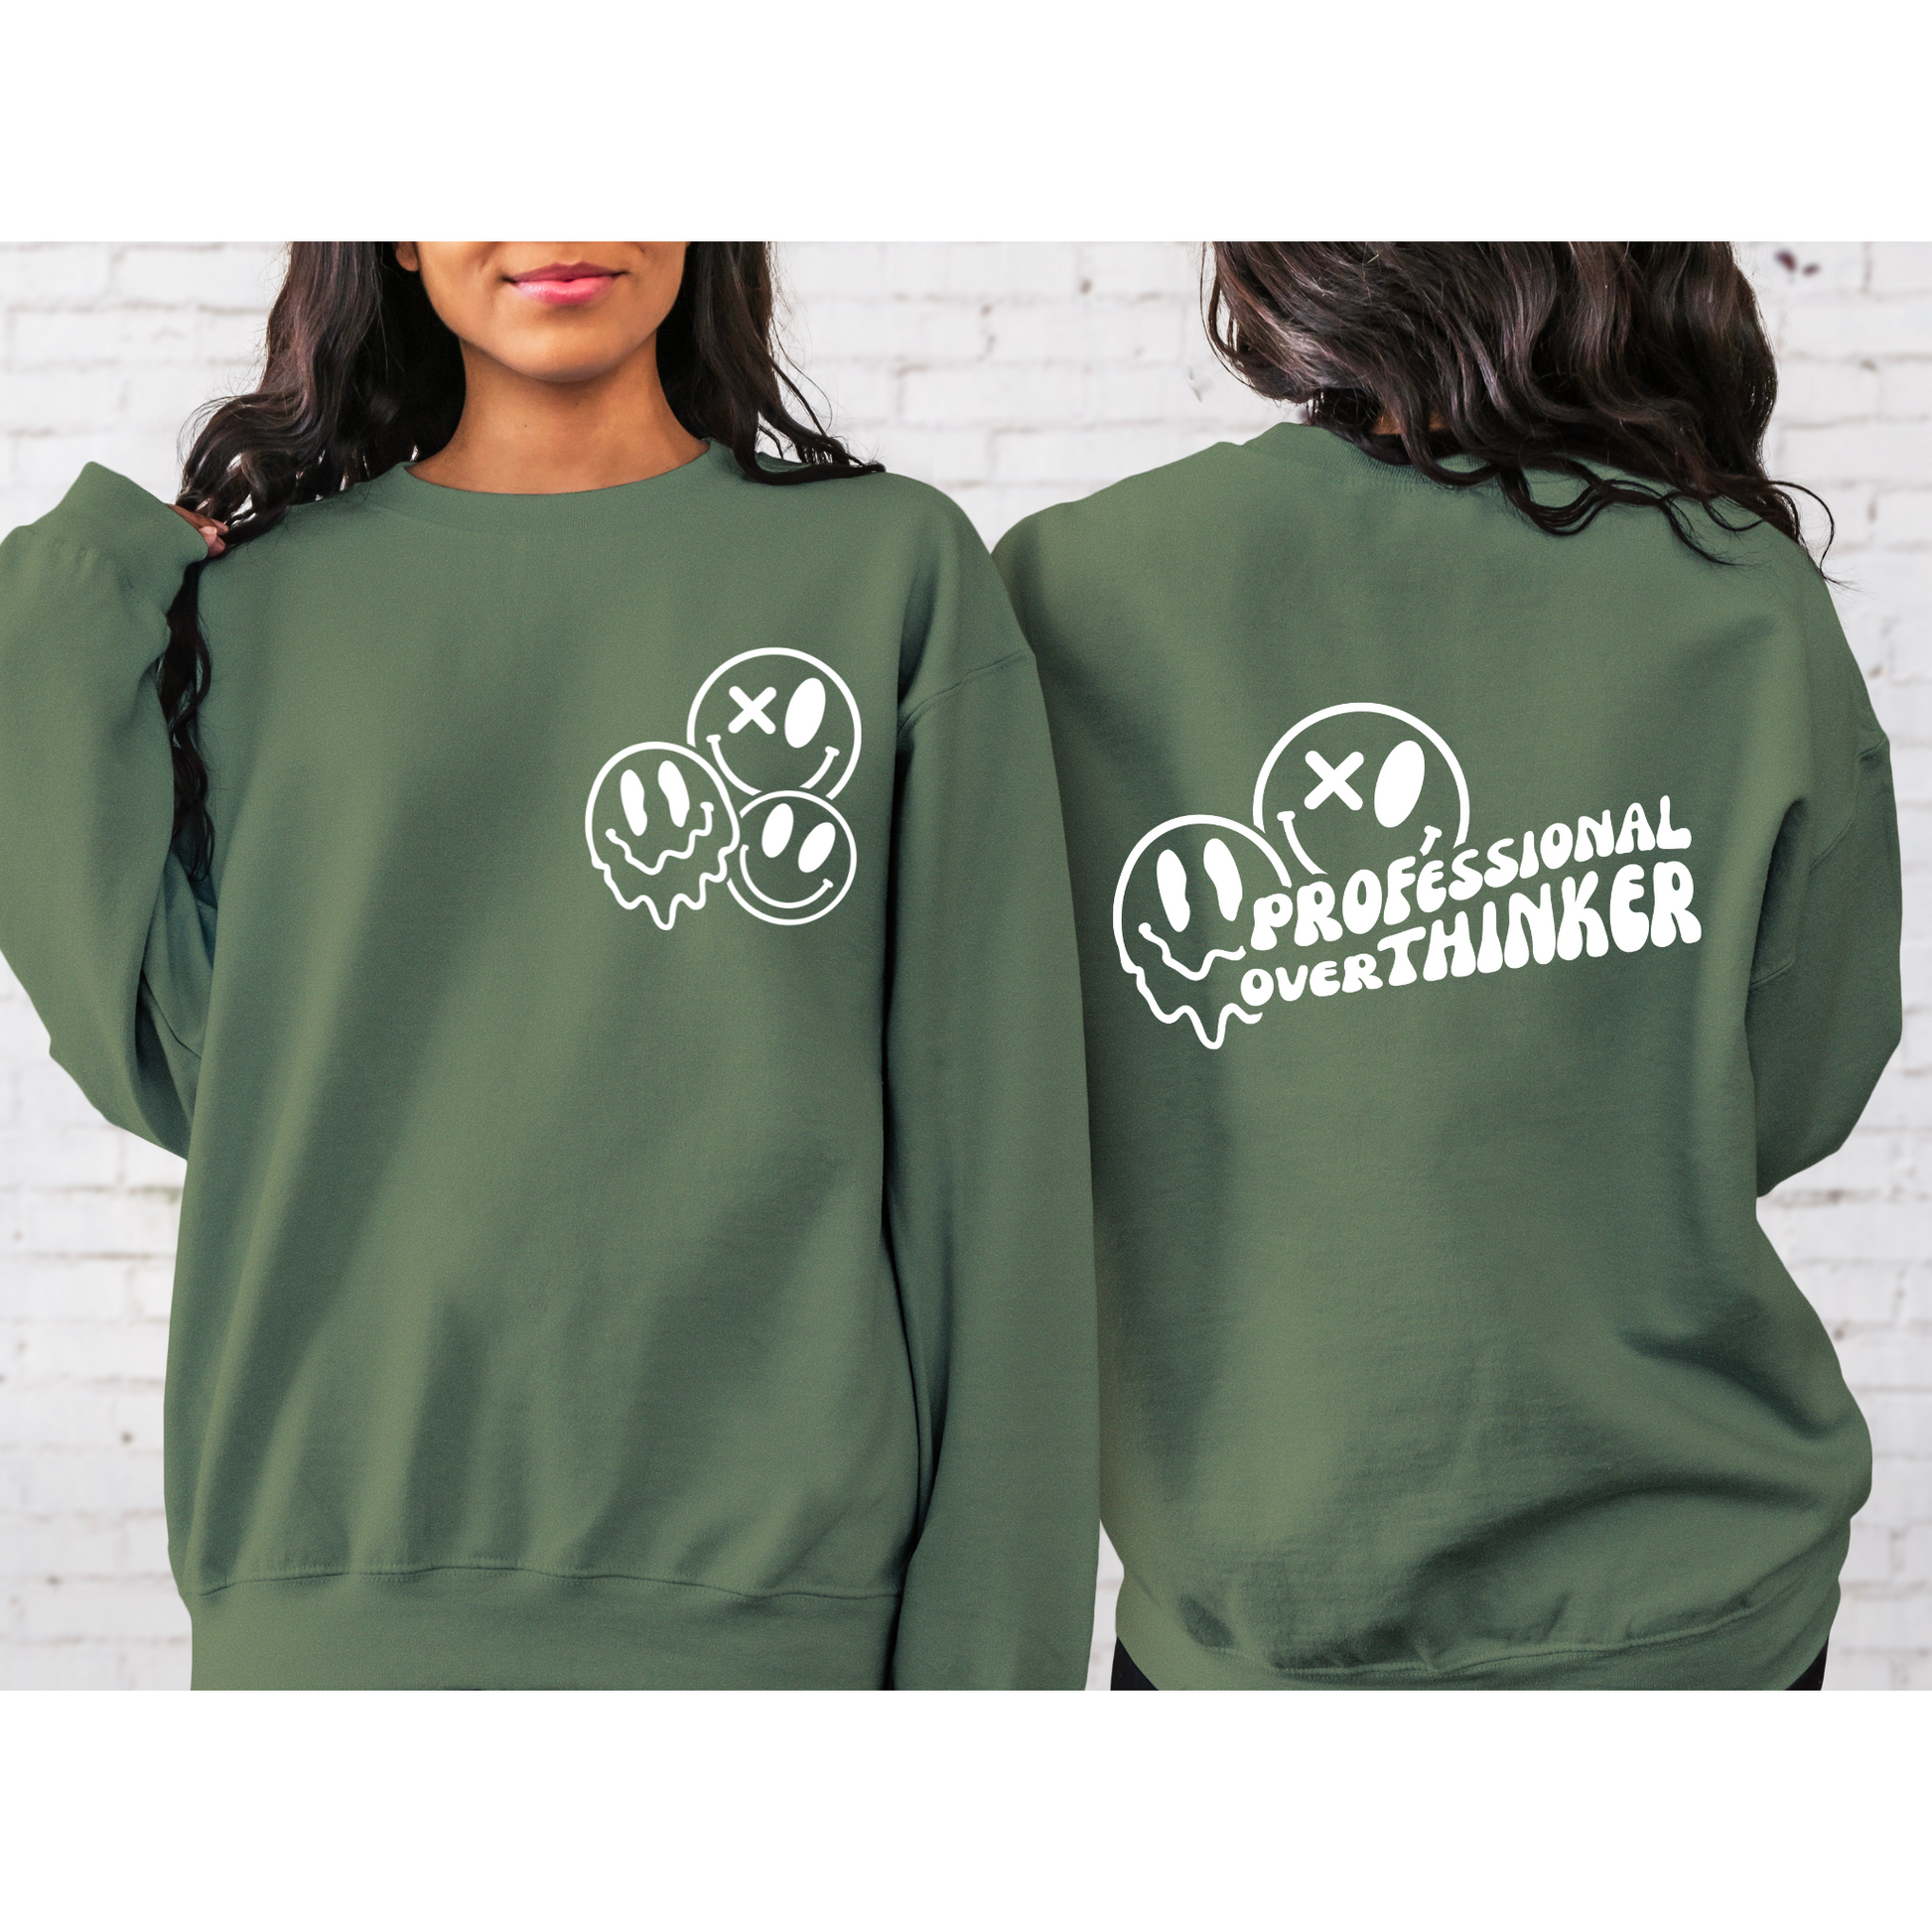 Professional Over Thinker Smiley Face Crewneck Sweatshirt Military Green